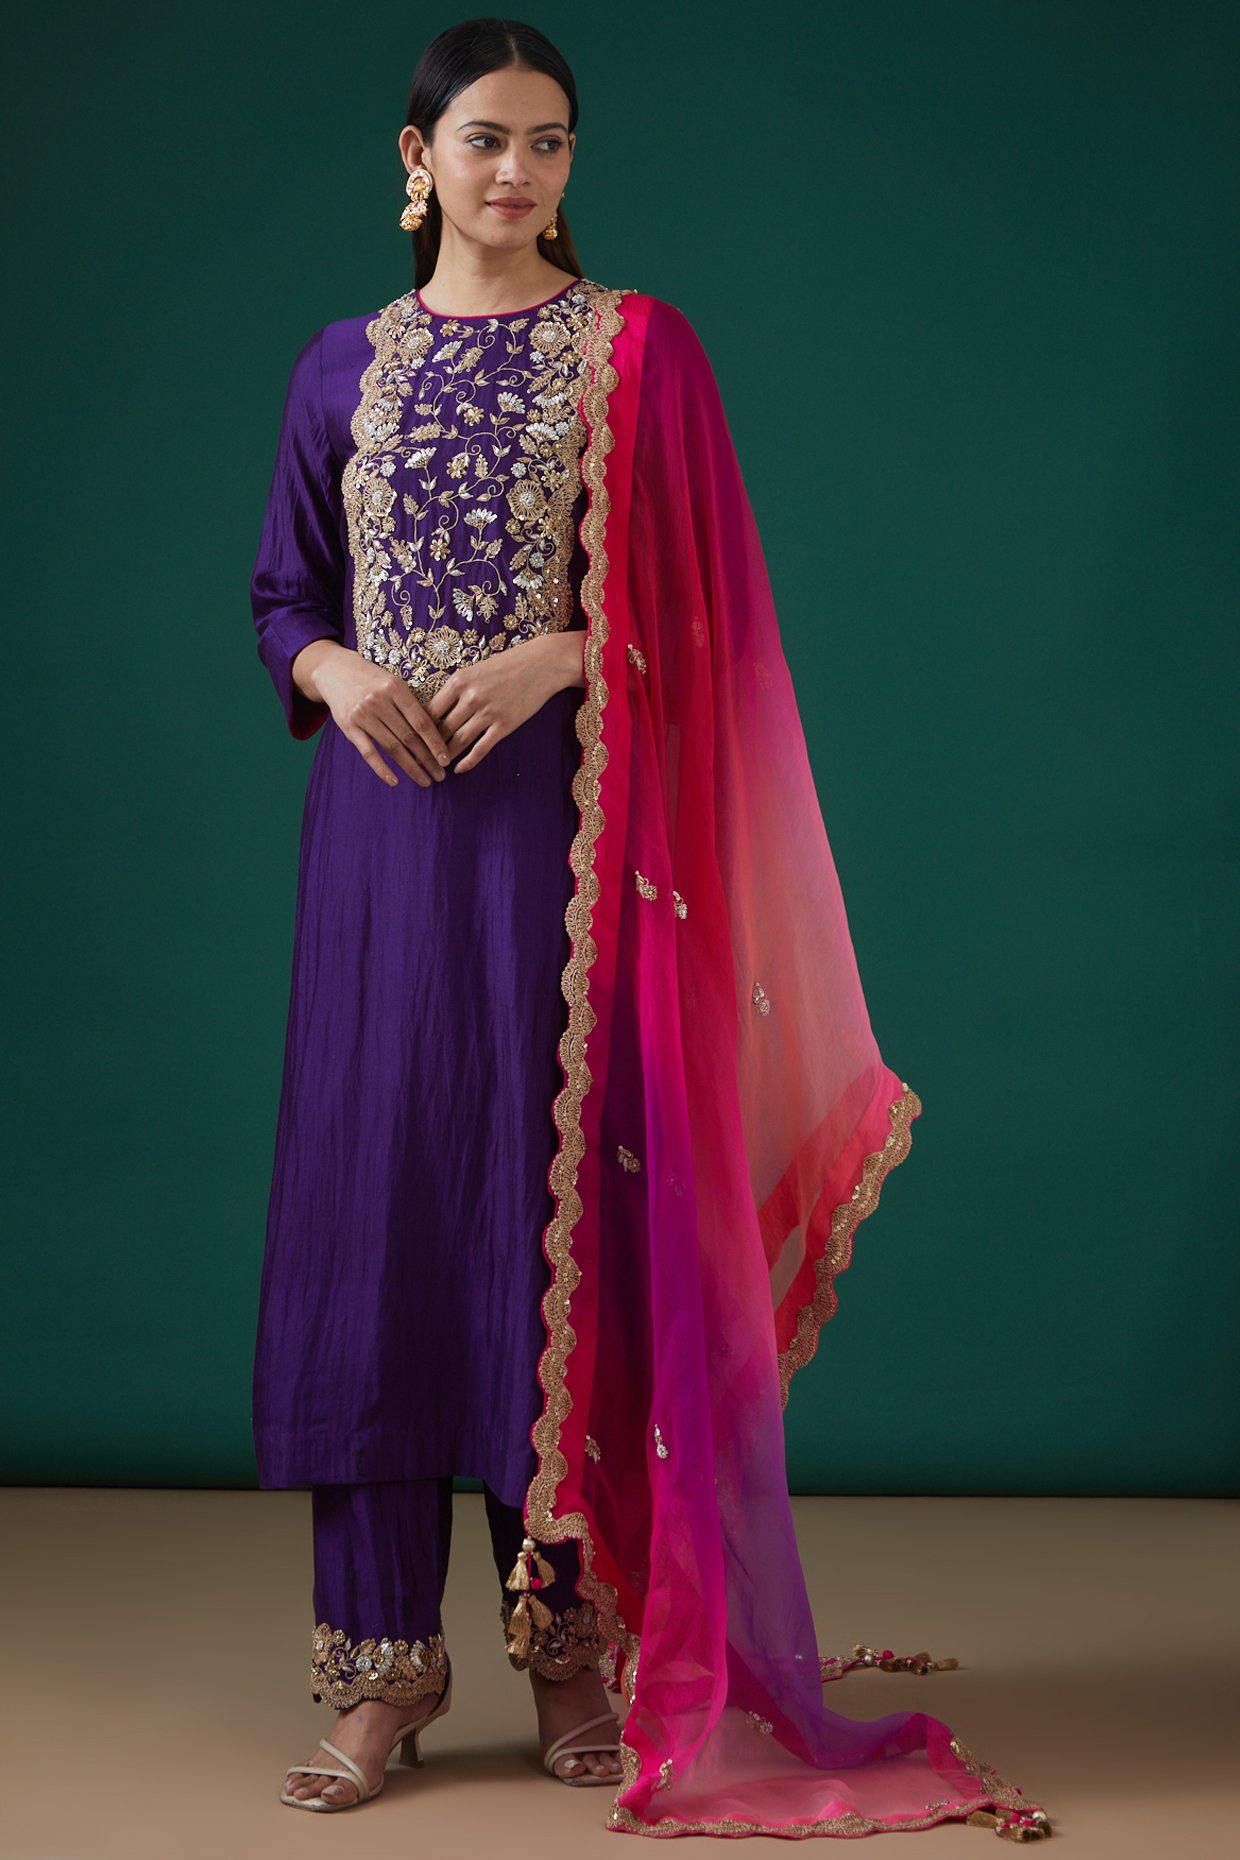 Buy Deep Purple Palazzo Suit In Silk With Brocade Floral Buttis And Matching  Pink Brocade Dupatta Online - Kalki Fashion